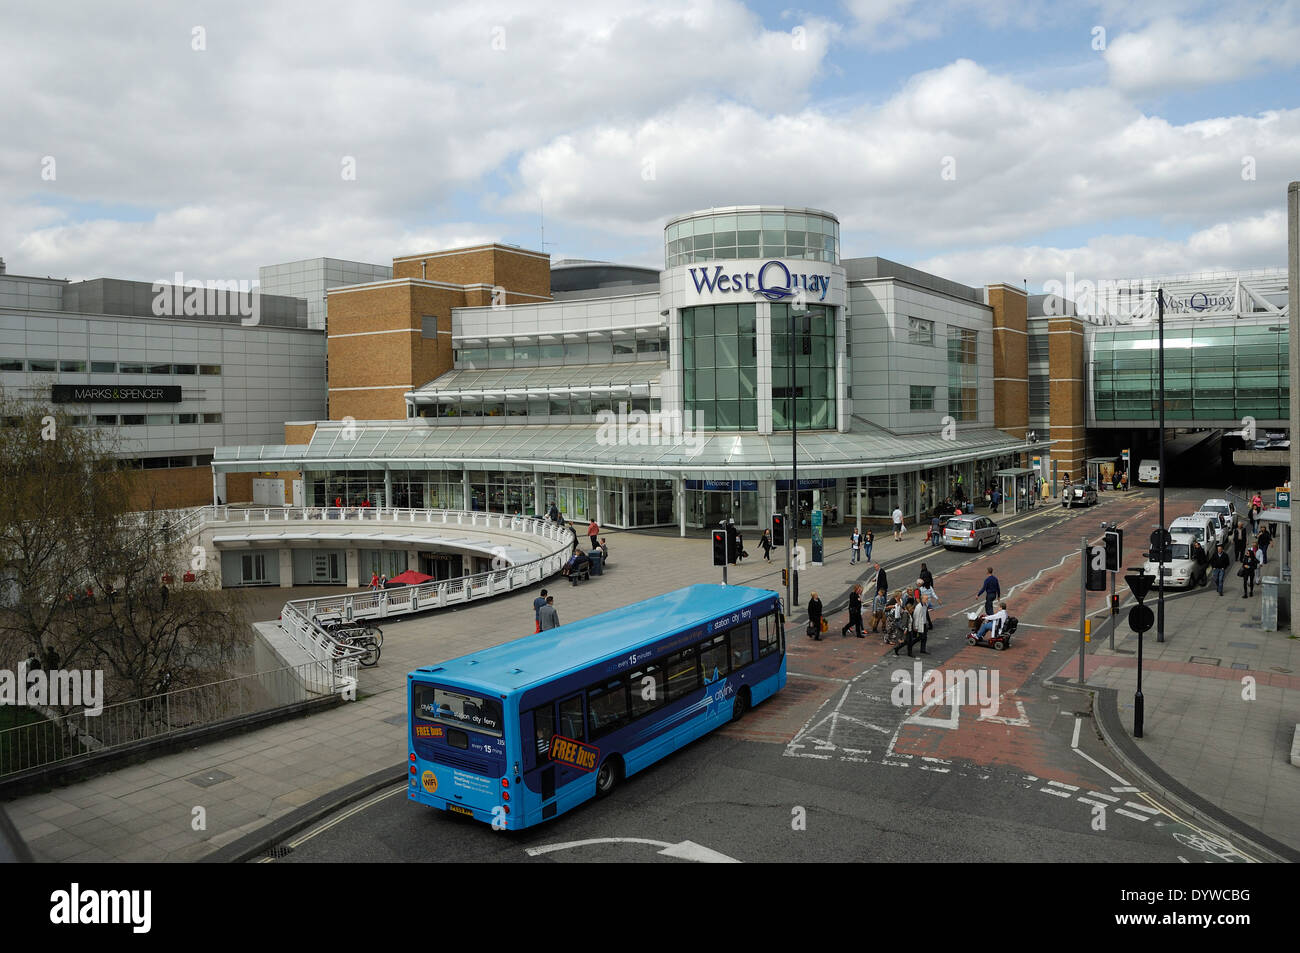 West Quay shopping centre in Southampton, Hampshire, UK Stock Photo